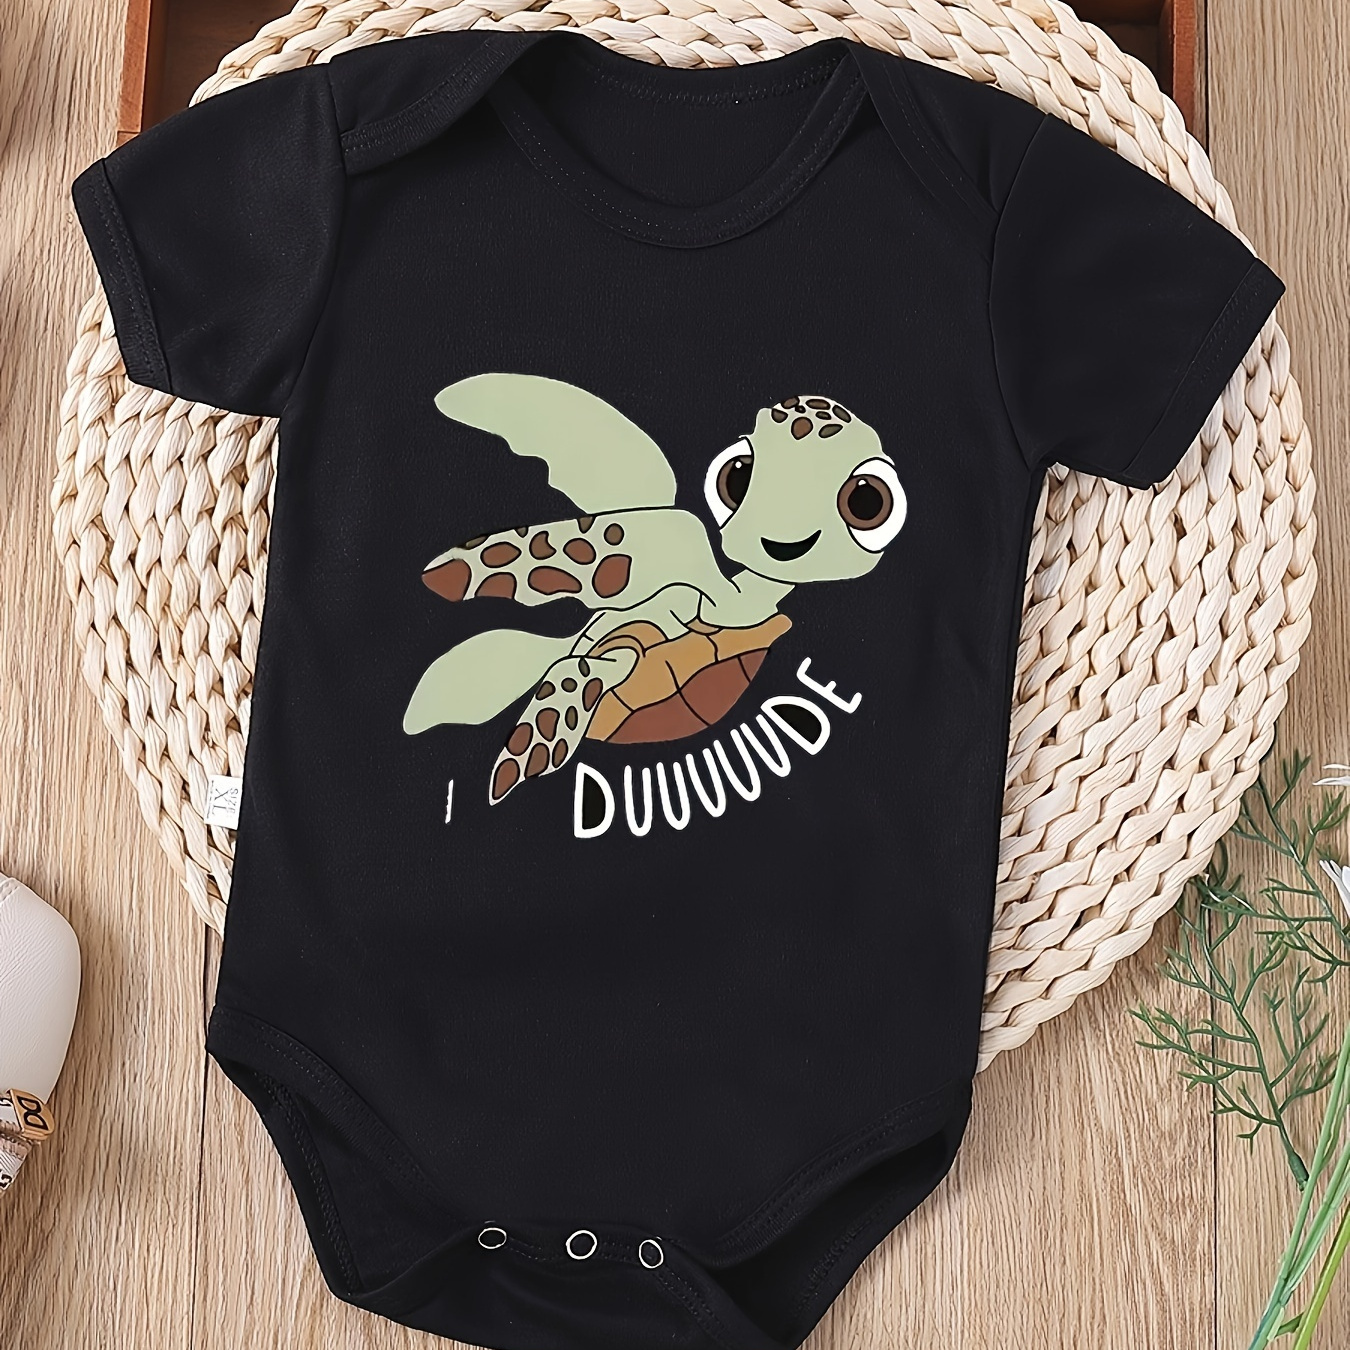 

Infant's "i Duuuude" Sea Turtle Print Bodysuit, Comfy Short Sleeve Onesie, Baby Boy's Clothing, As Gift